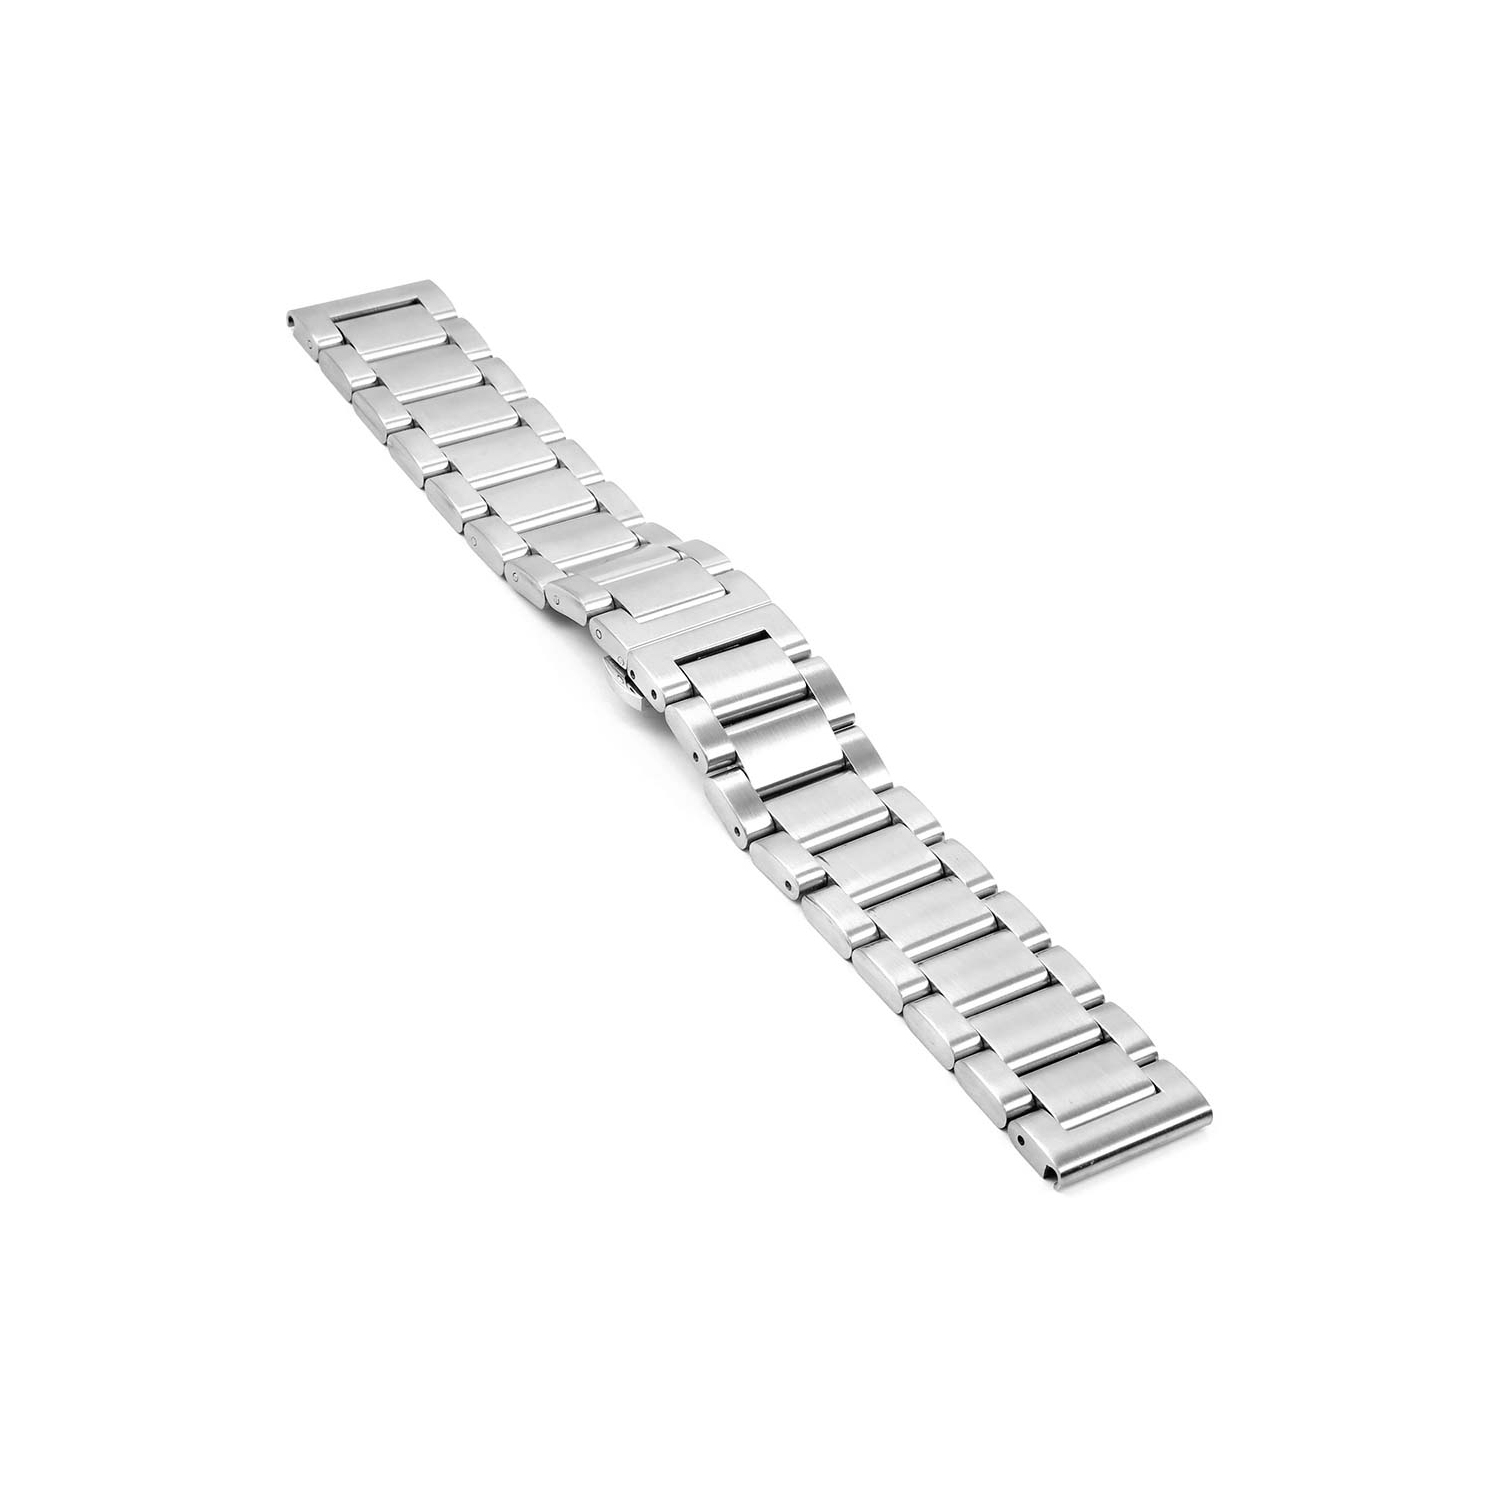 StrapsCo Metal Watch Band for Samsung Gear S3 Classic - Silver